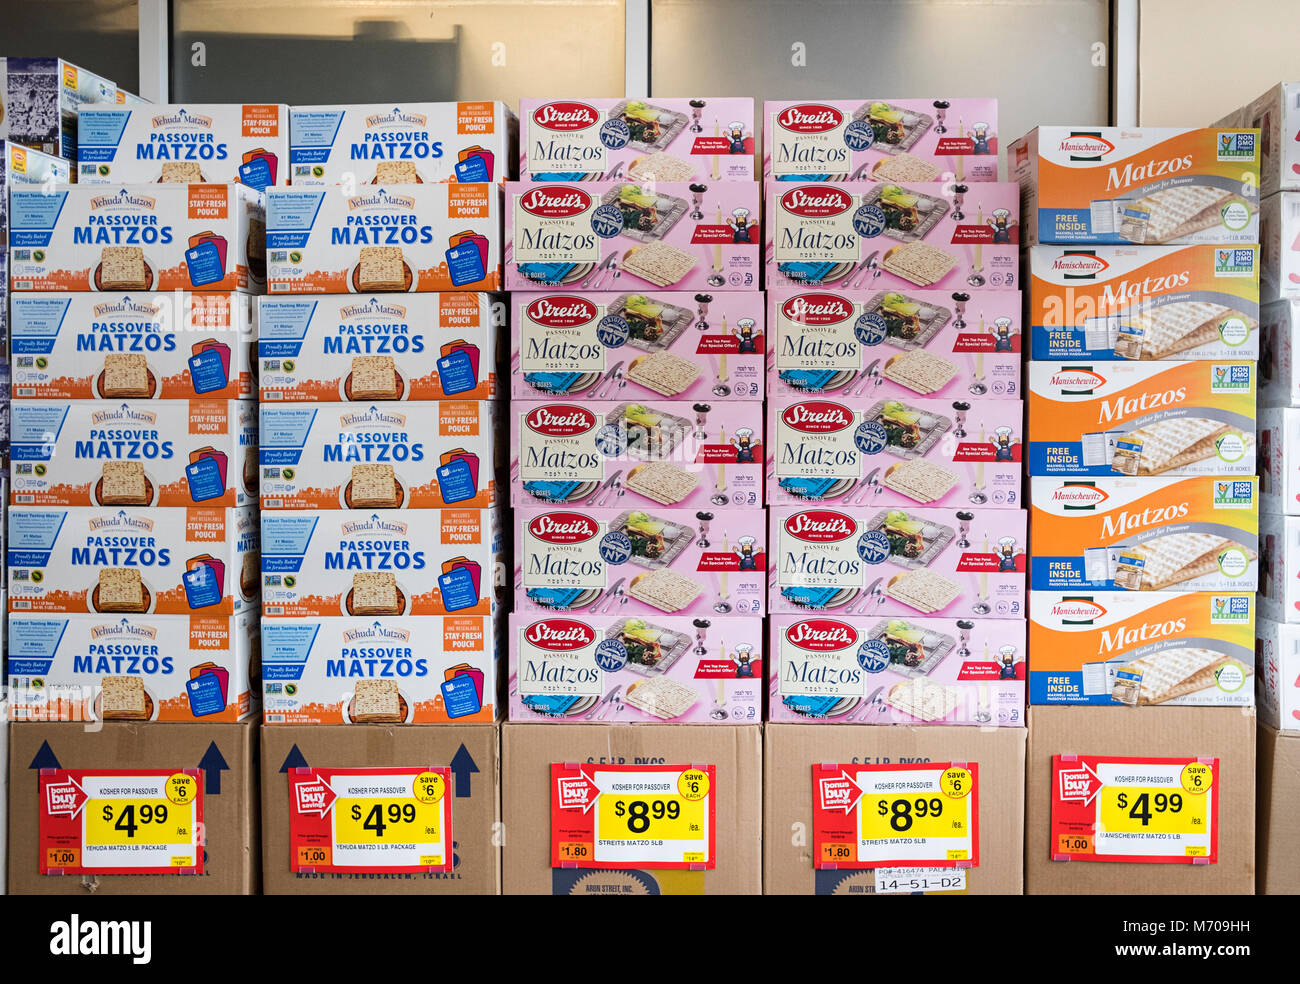 Boxes of Passover matzos for sale inside the Stop & Shop supermarket in Mt. Kisco, Westchester, New York. Stock Photo